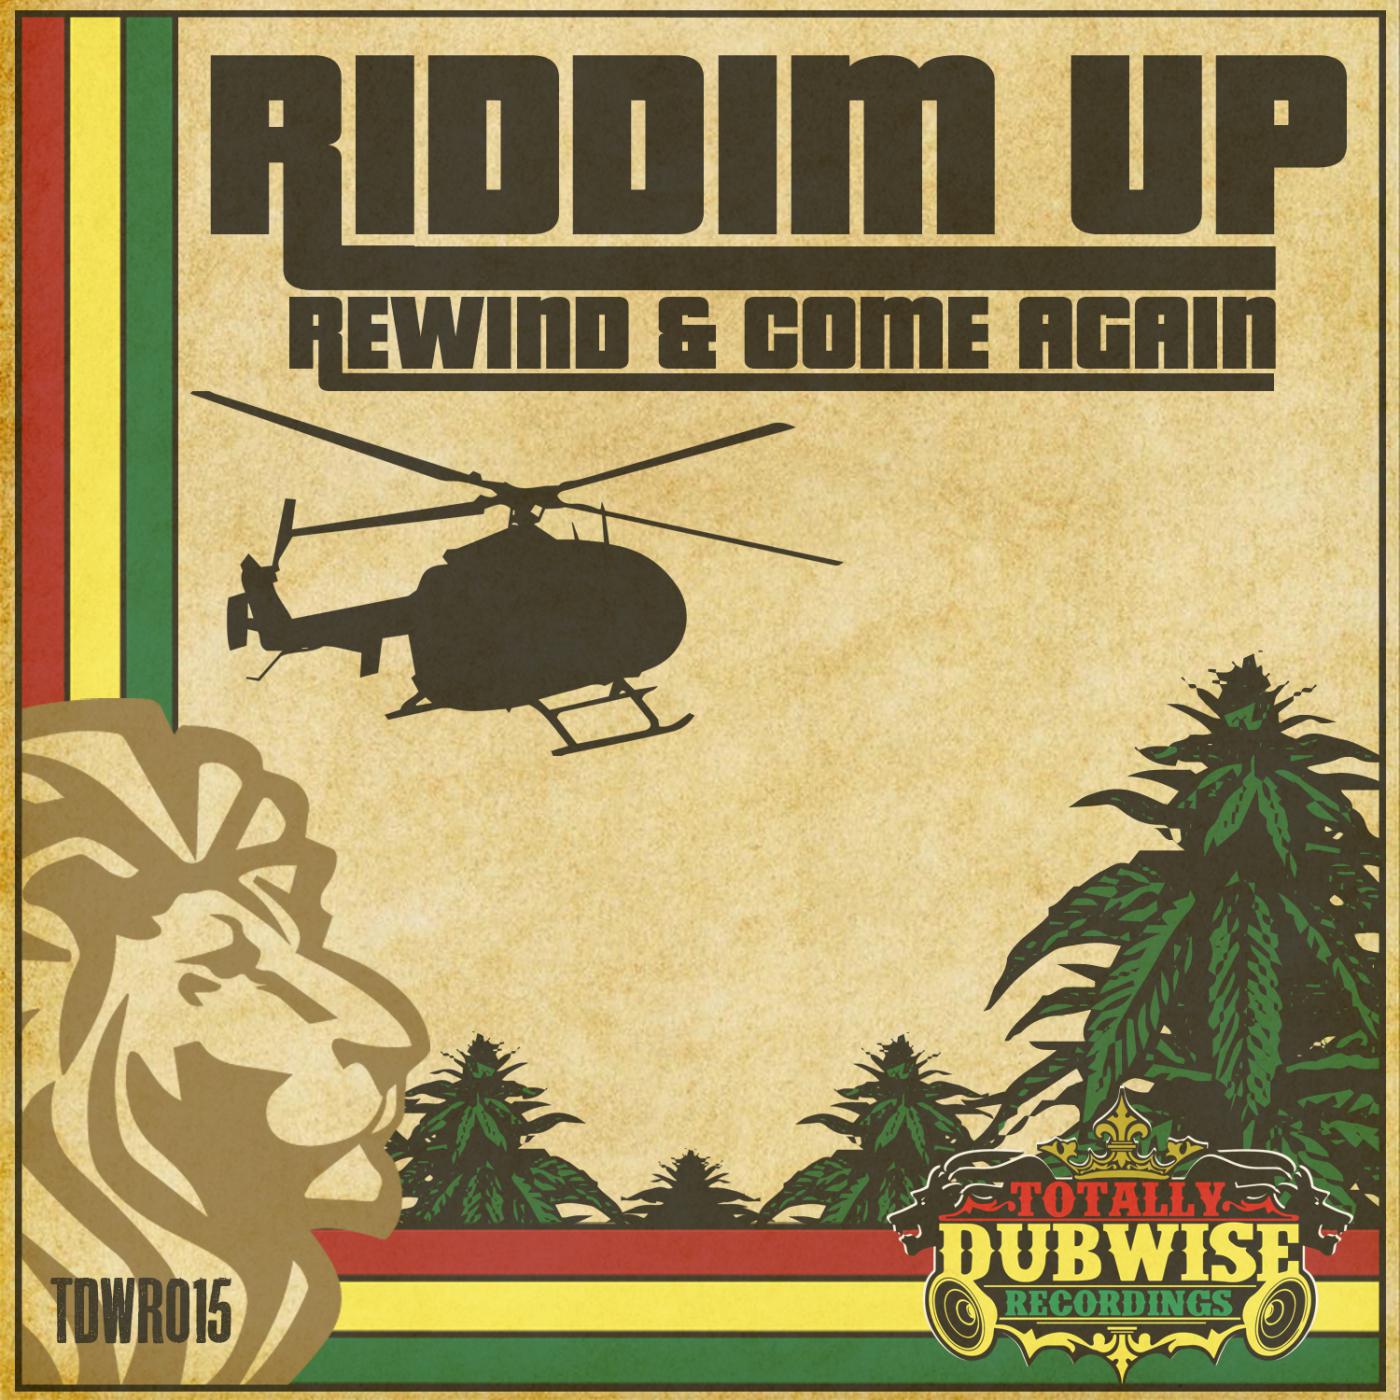 Totally Dubwise Presents: Riddim Up Rewind & Come Again"